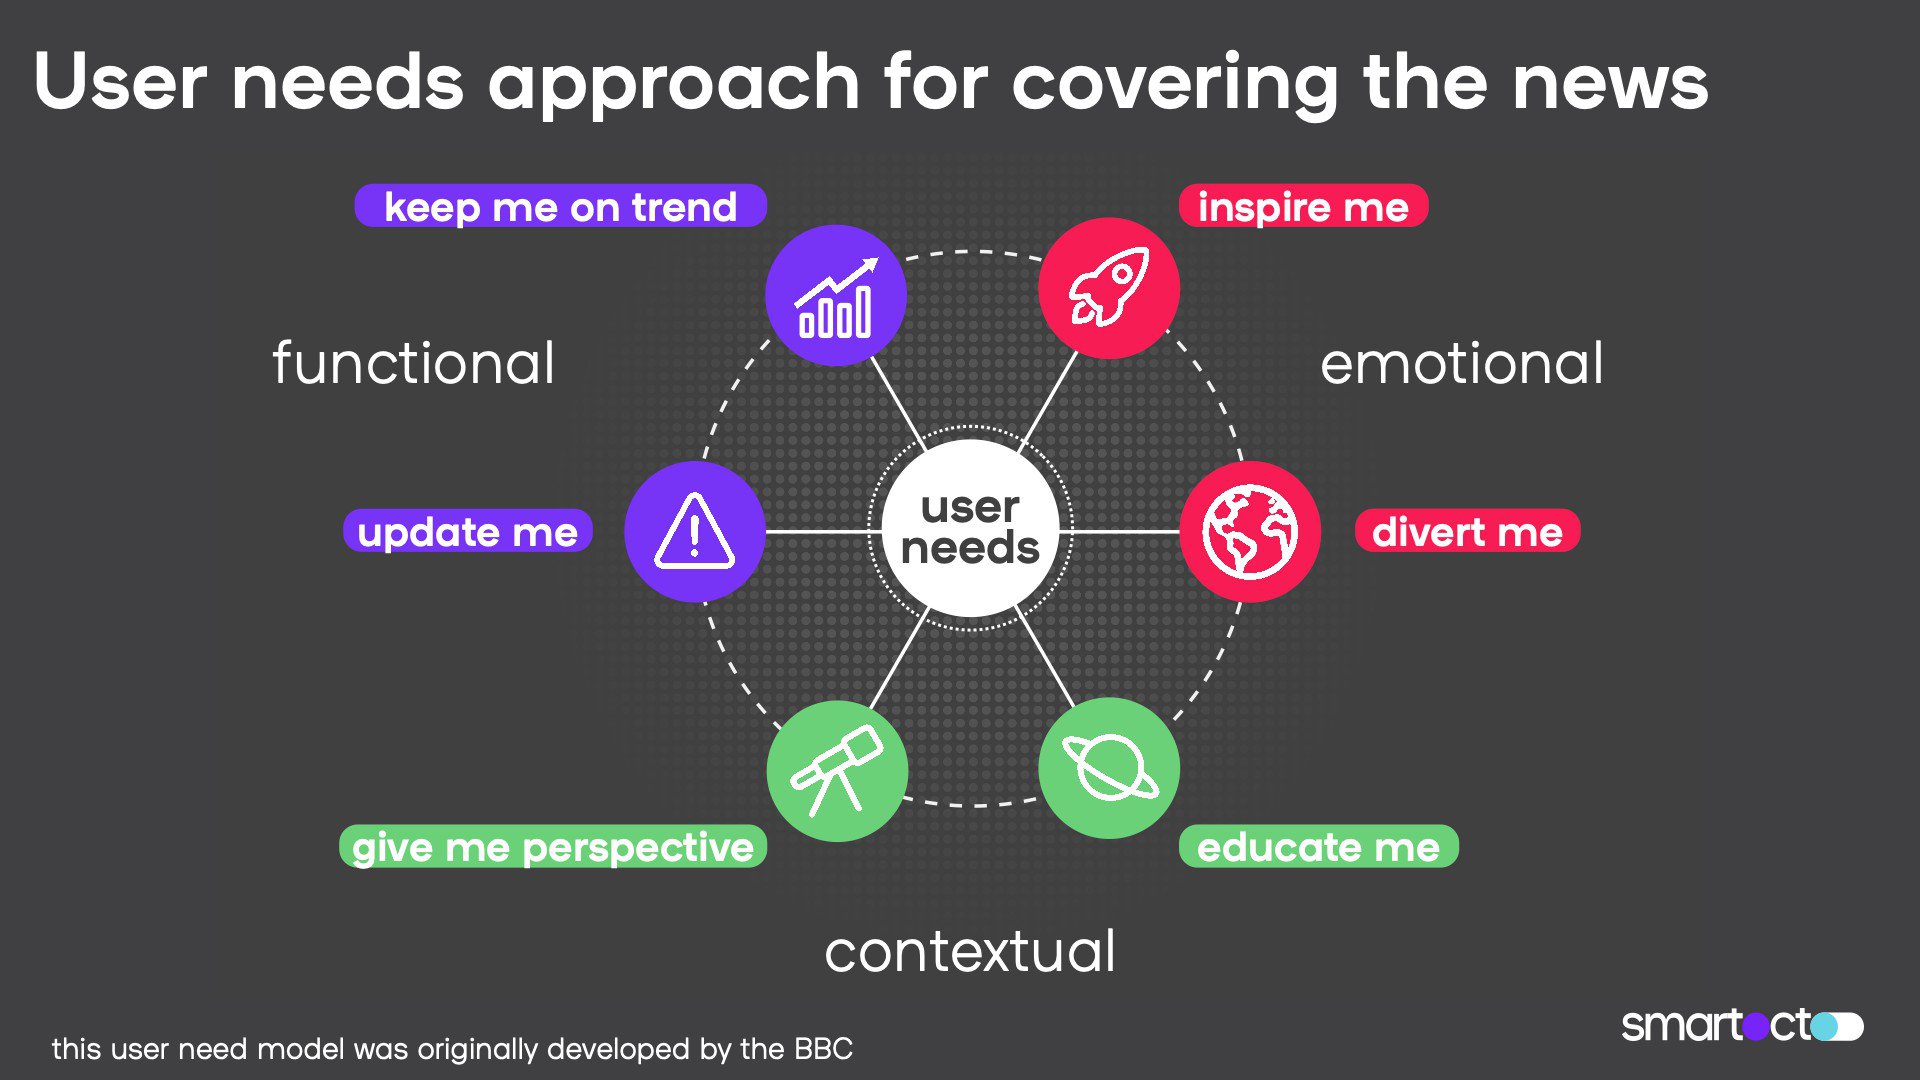 The user needs approach for covering the news is functional, emotional or contextual